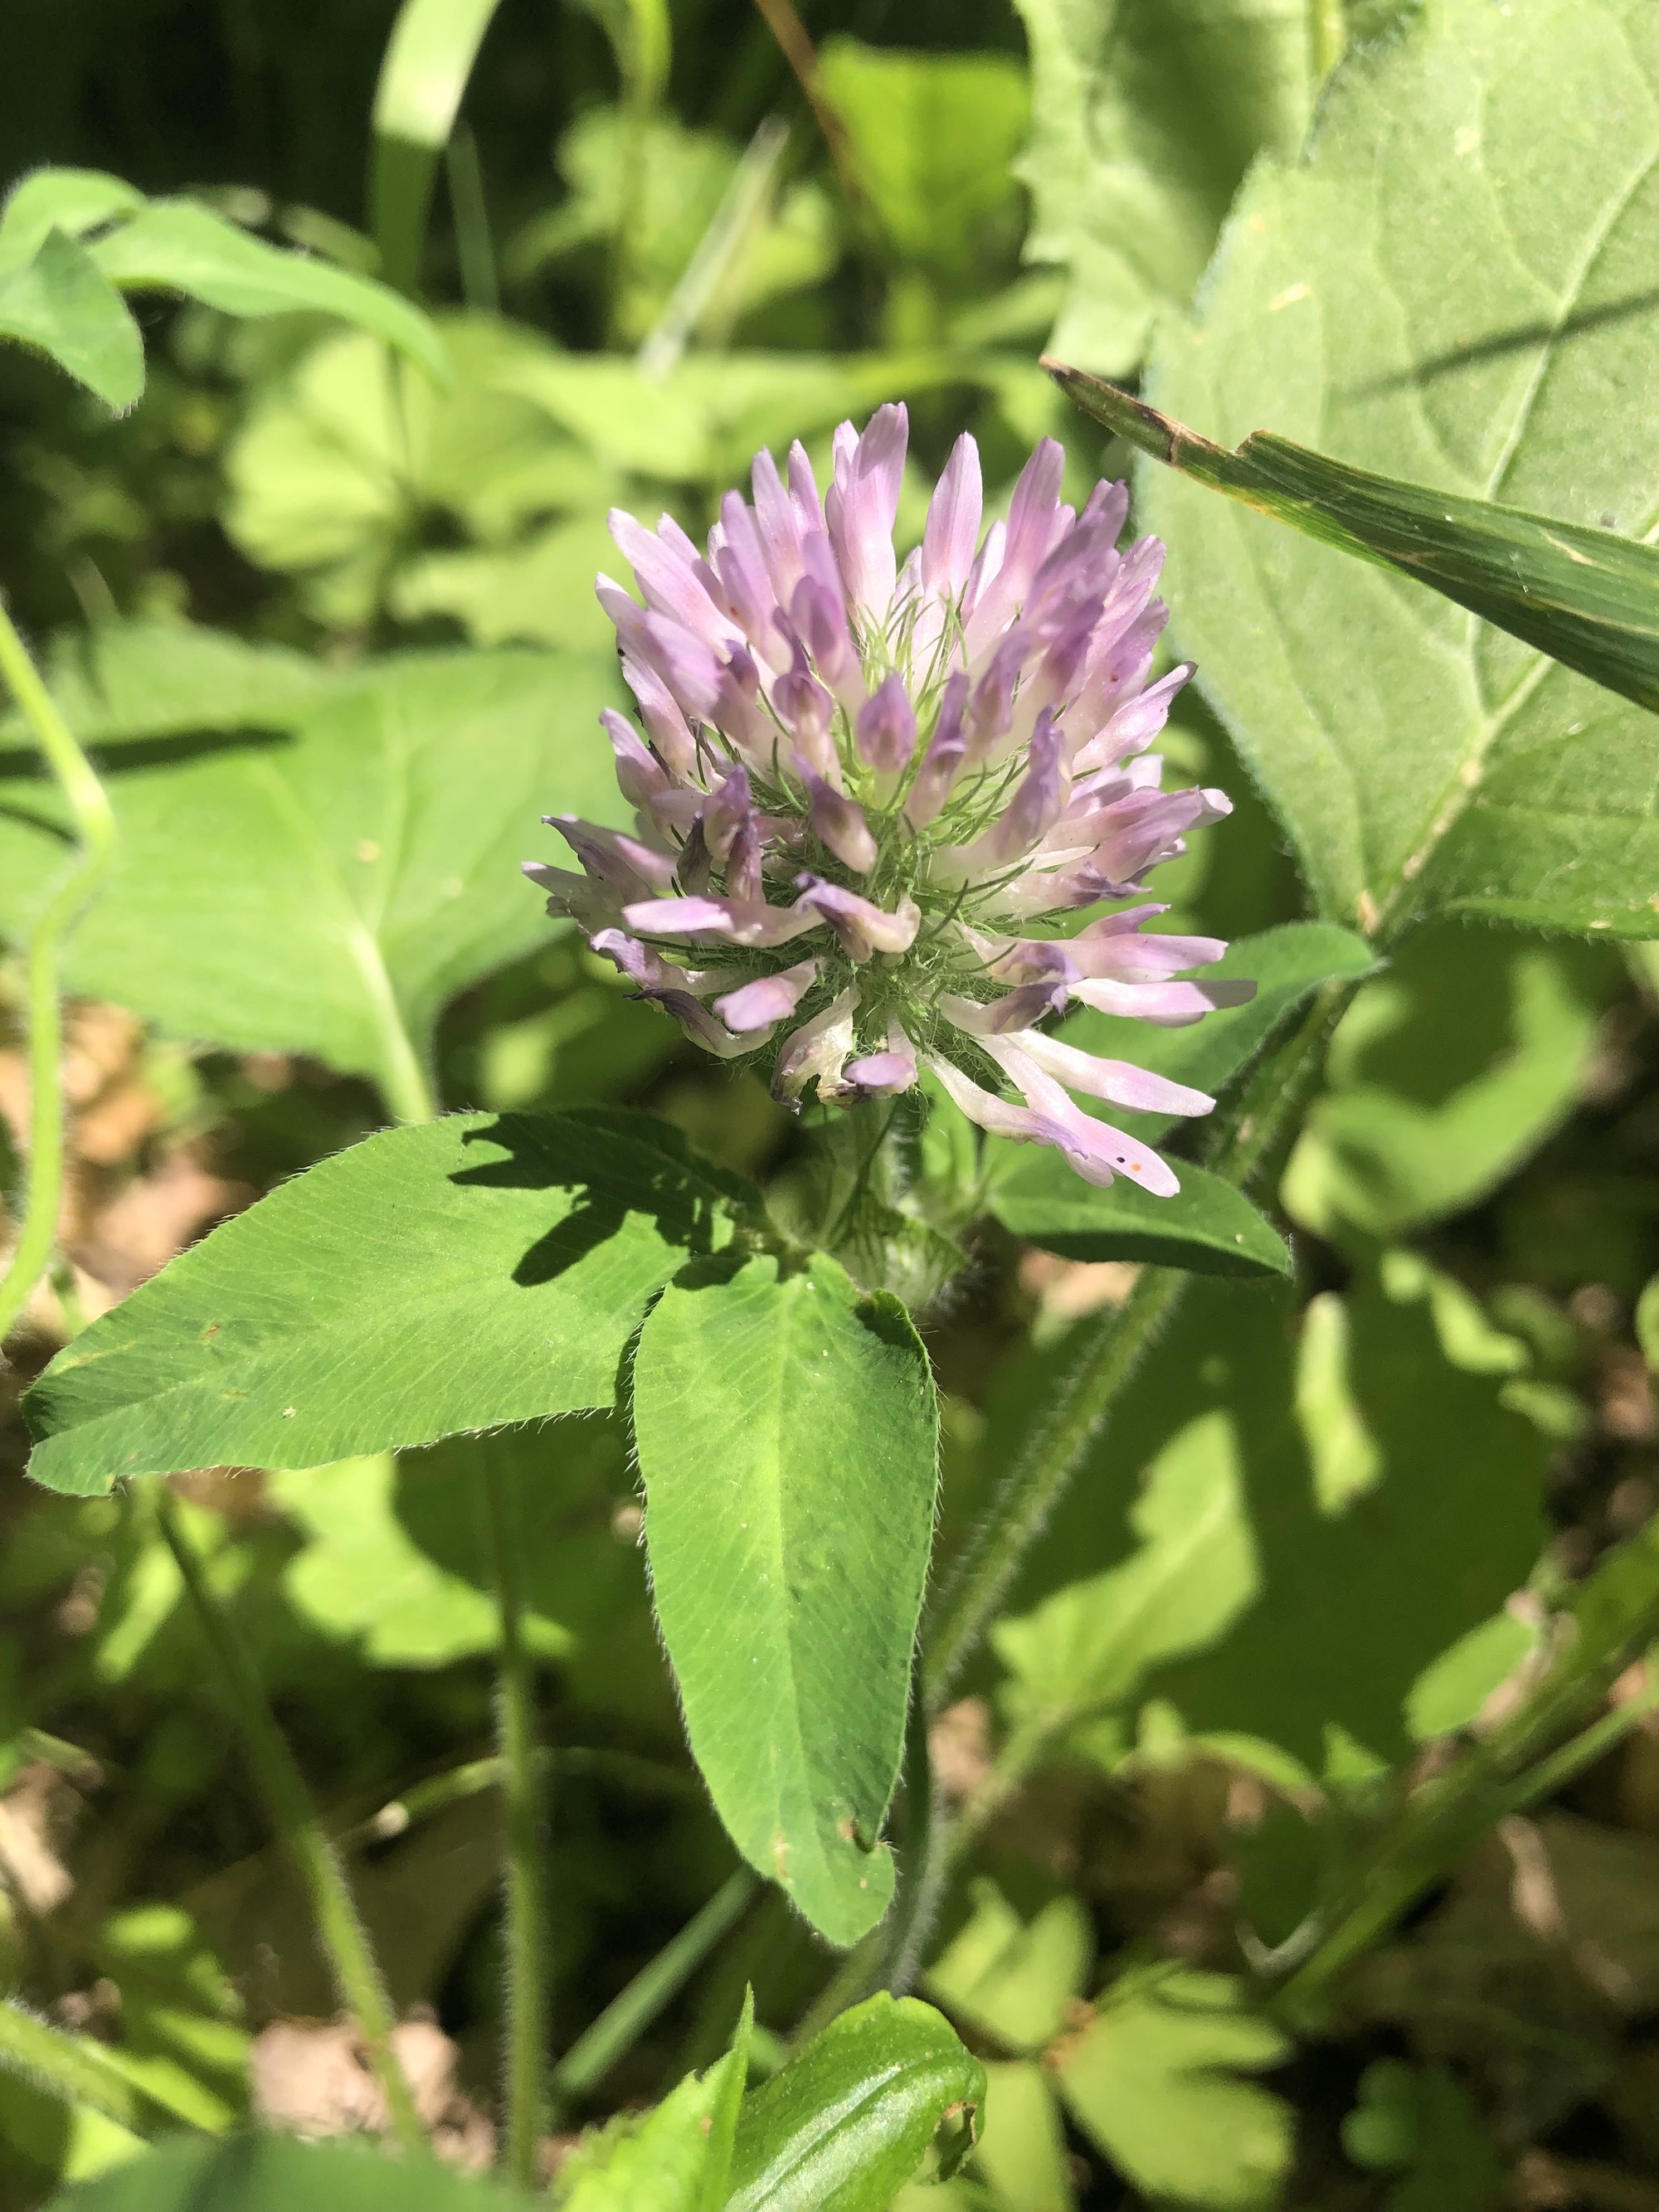 Red Clover in Nakoma Park in Madison, Wisconsin on June 17, 2021.